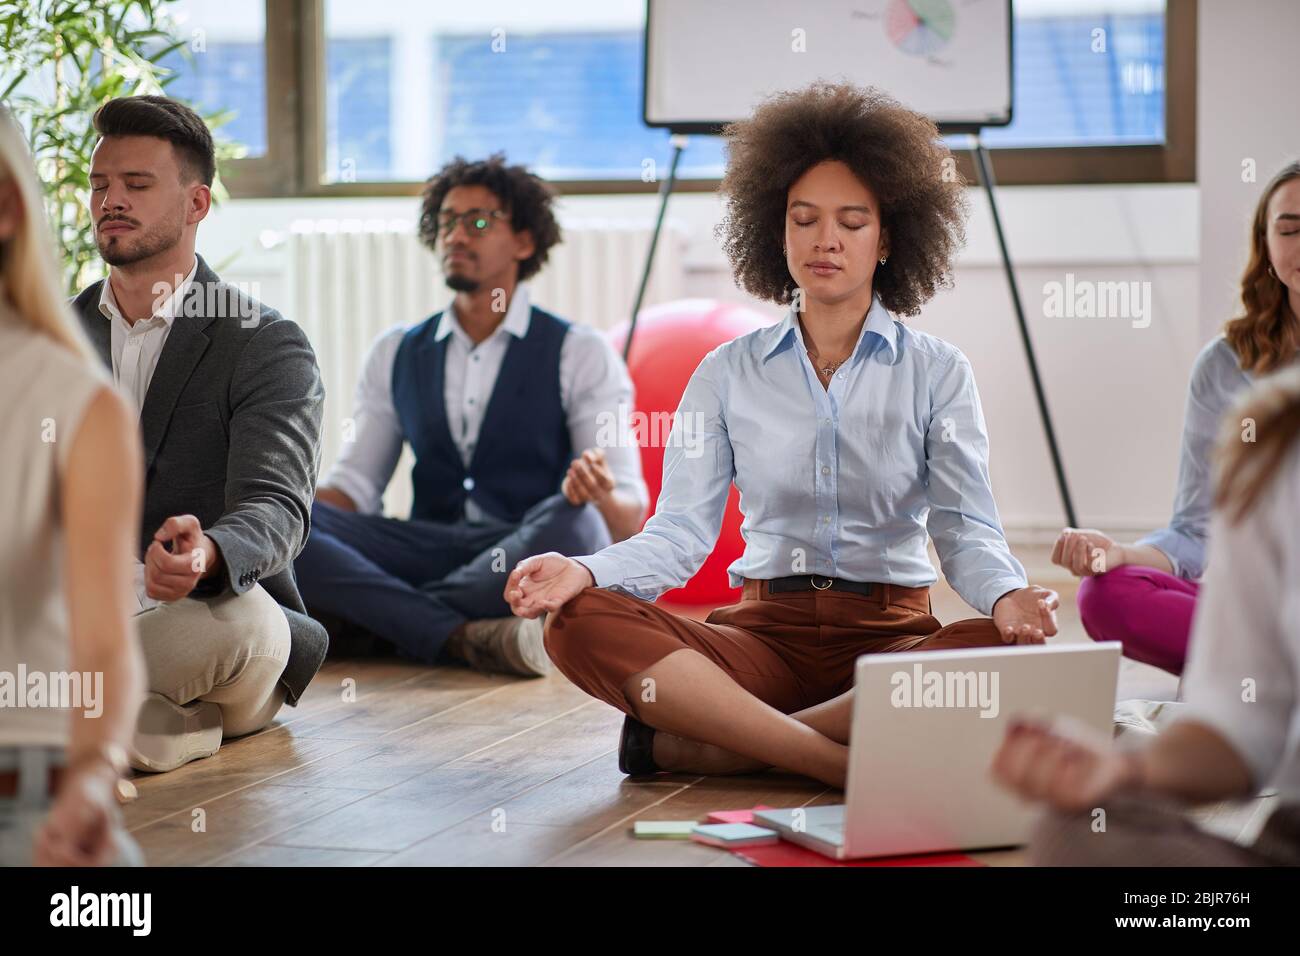 colleagues meditating at work, focus on female afro-american. togetherness, teambuilding, increasing productivity, relaxing. Stock Photo